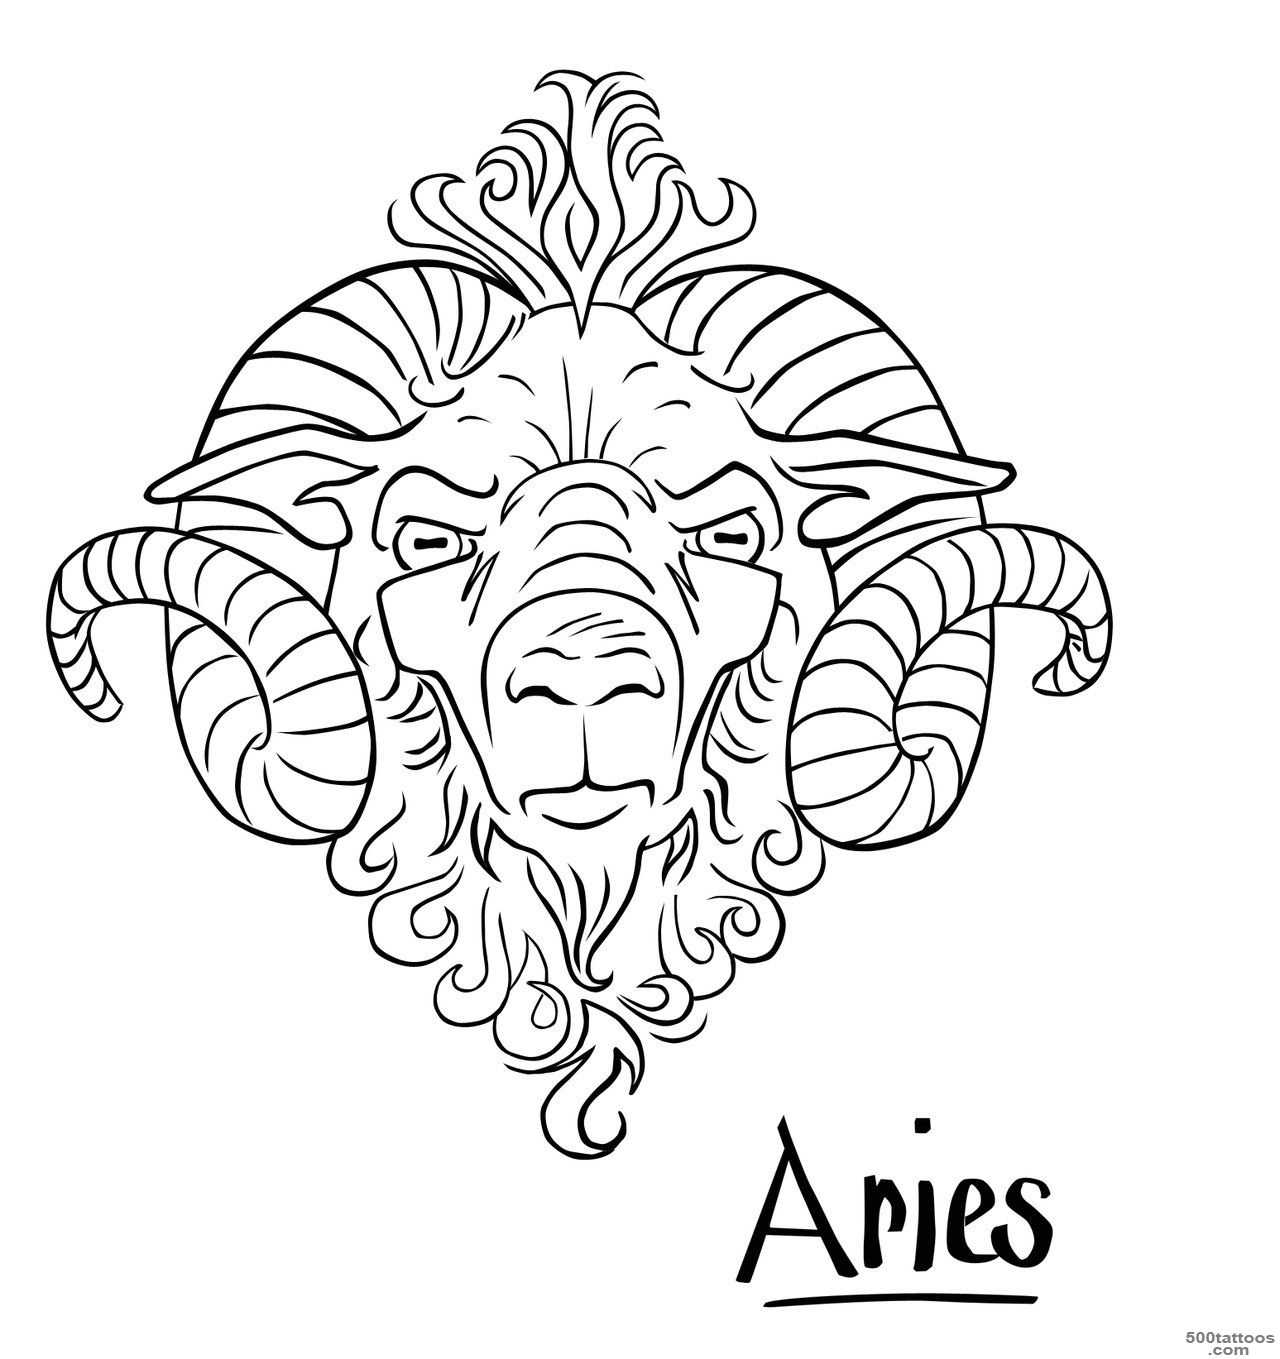 Aries Tattoos Designs, Ideas and Meaning  Tattoos For You_37